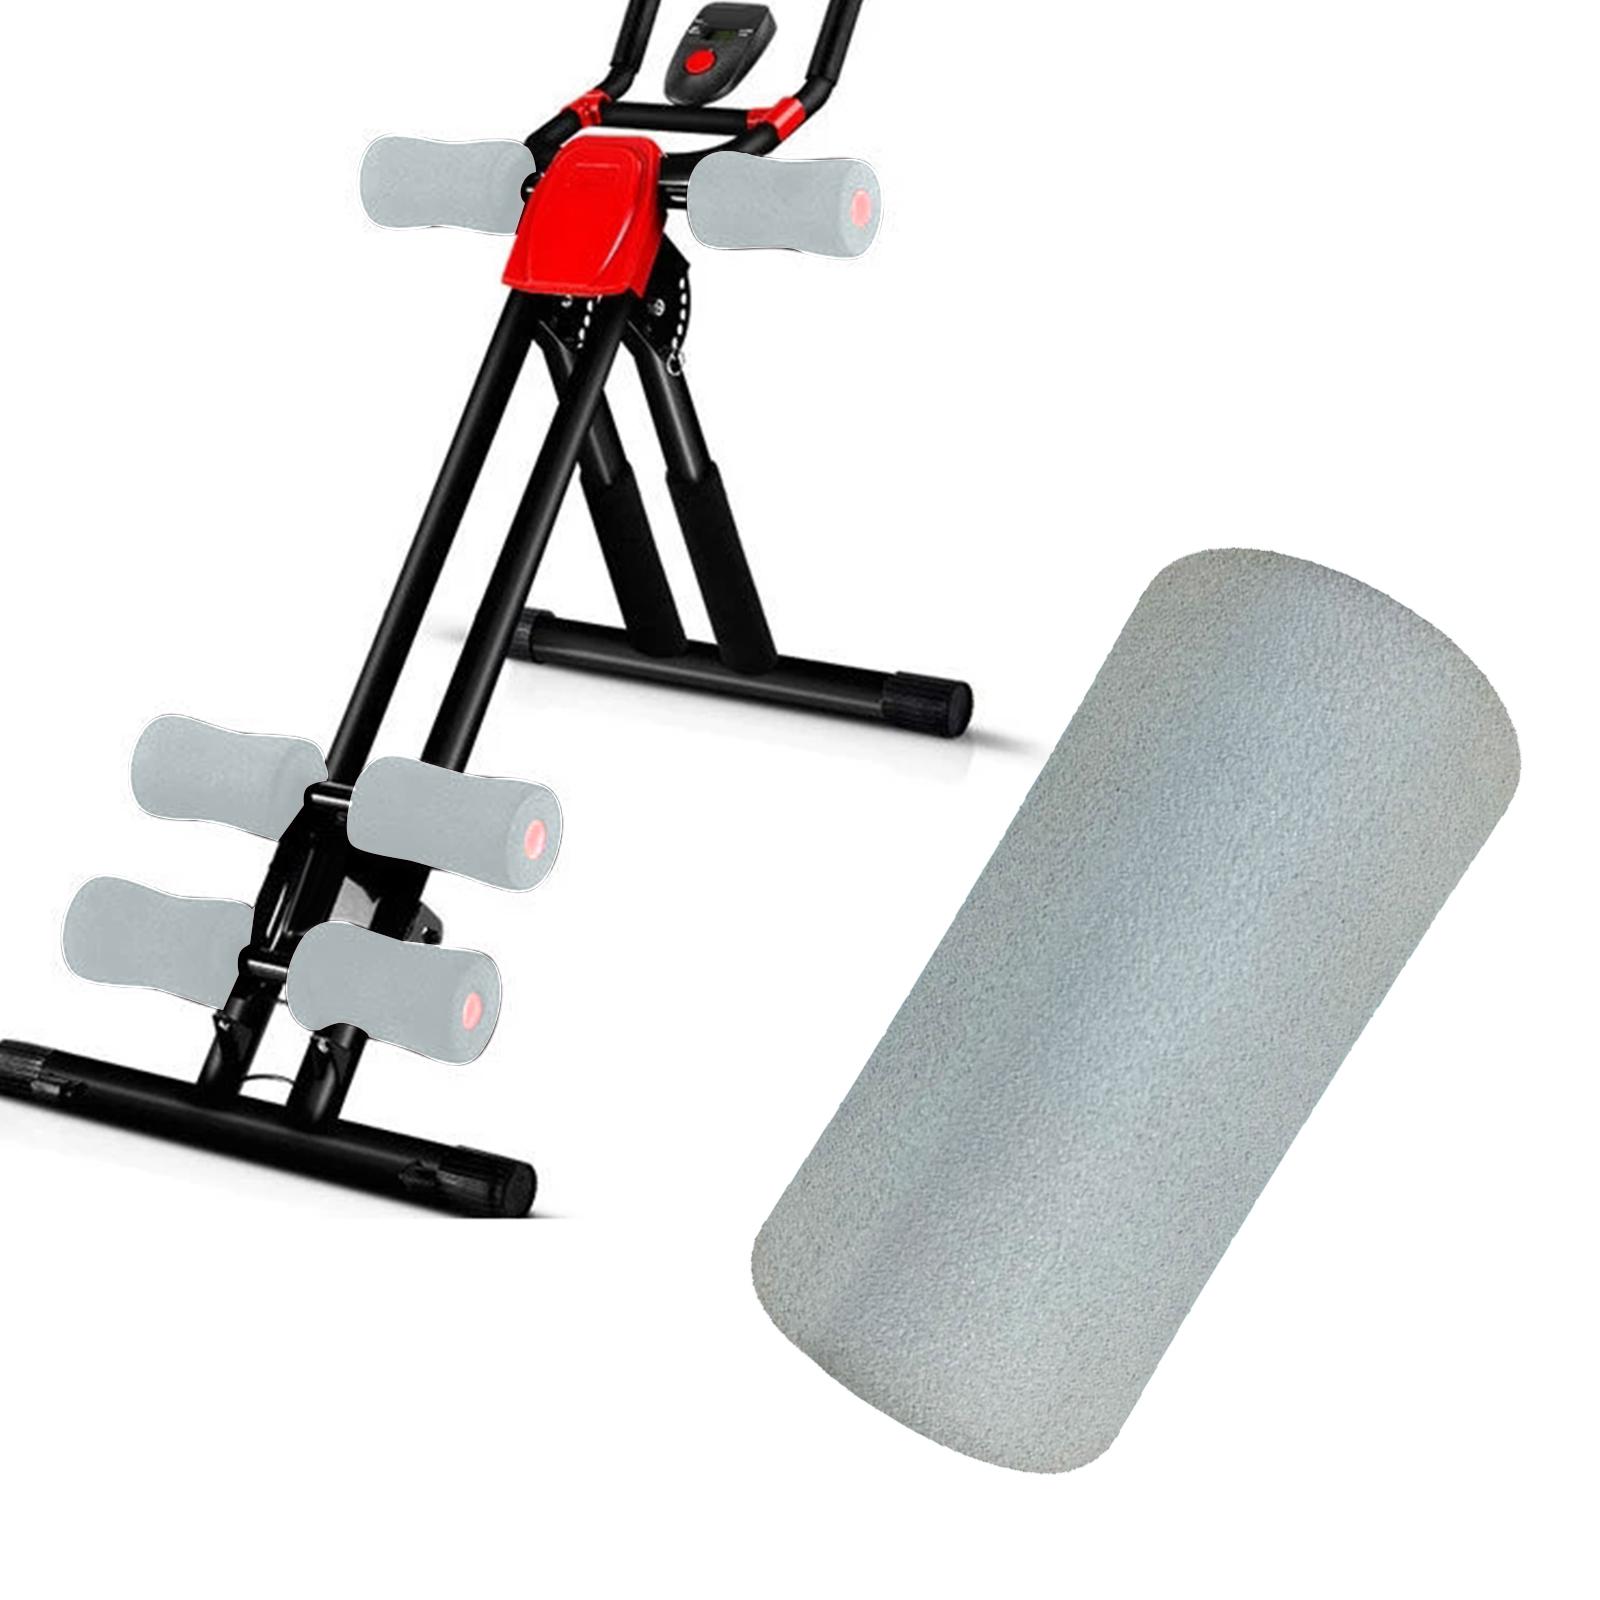 Foam Foot Pads Rollers for Weight Bench Abdominal Trainer Workout Machine Gray